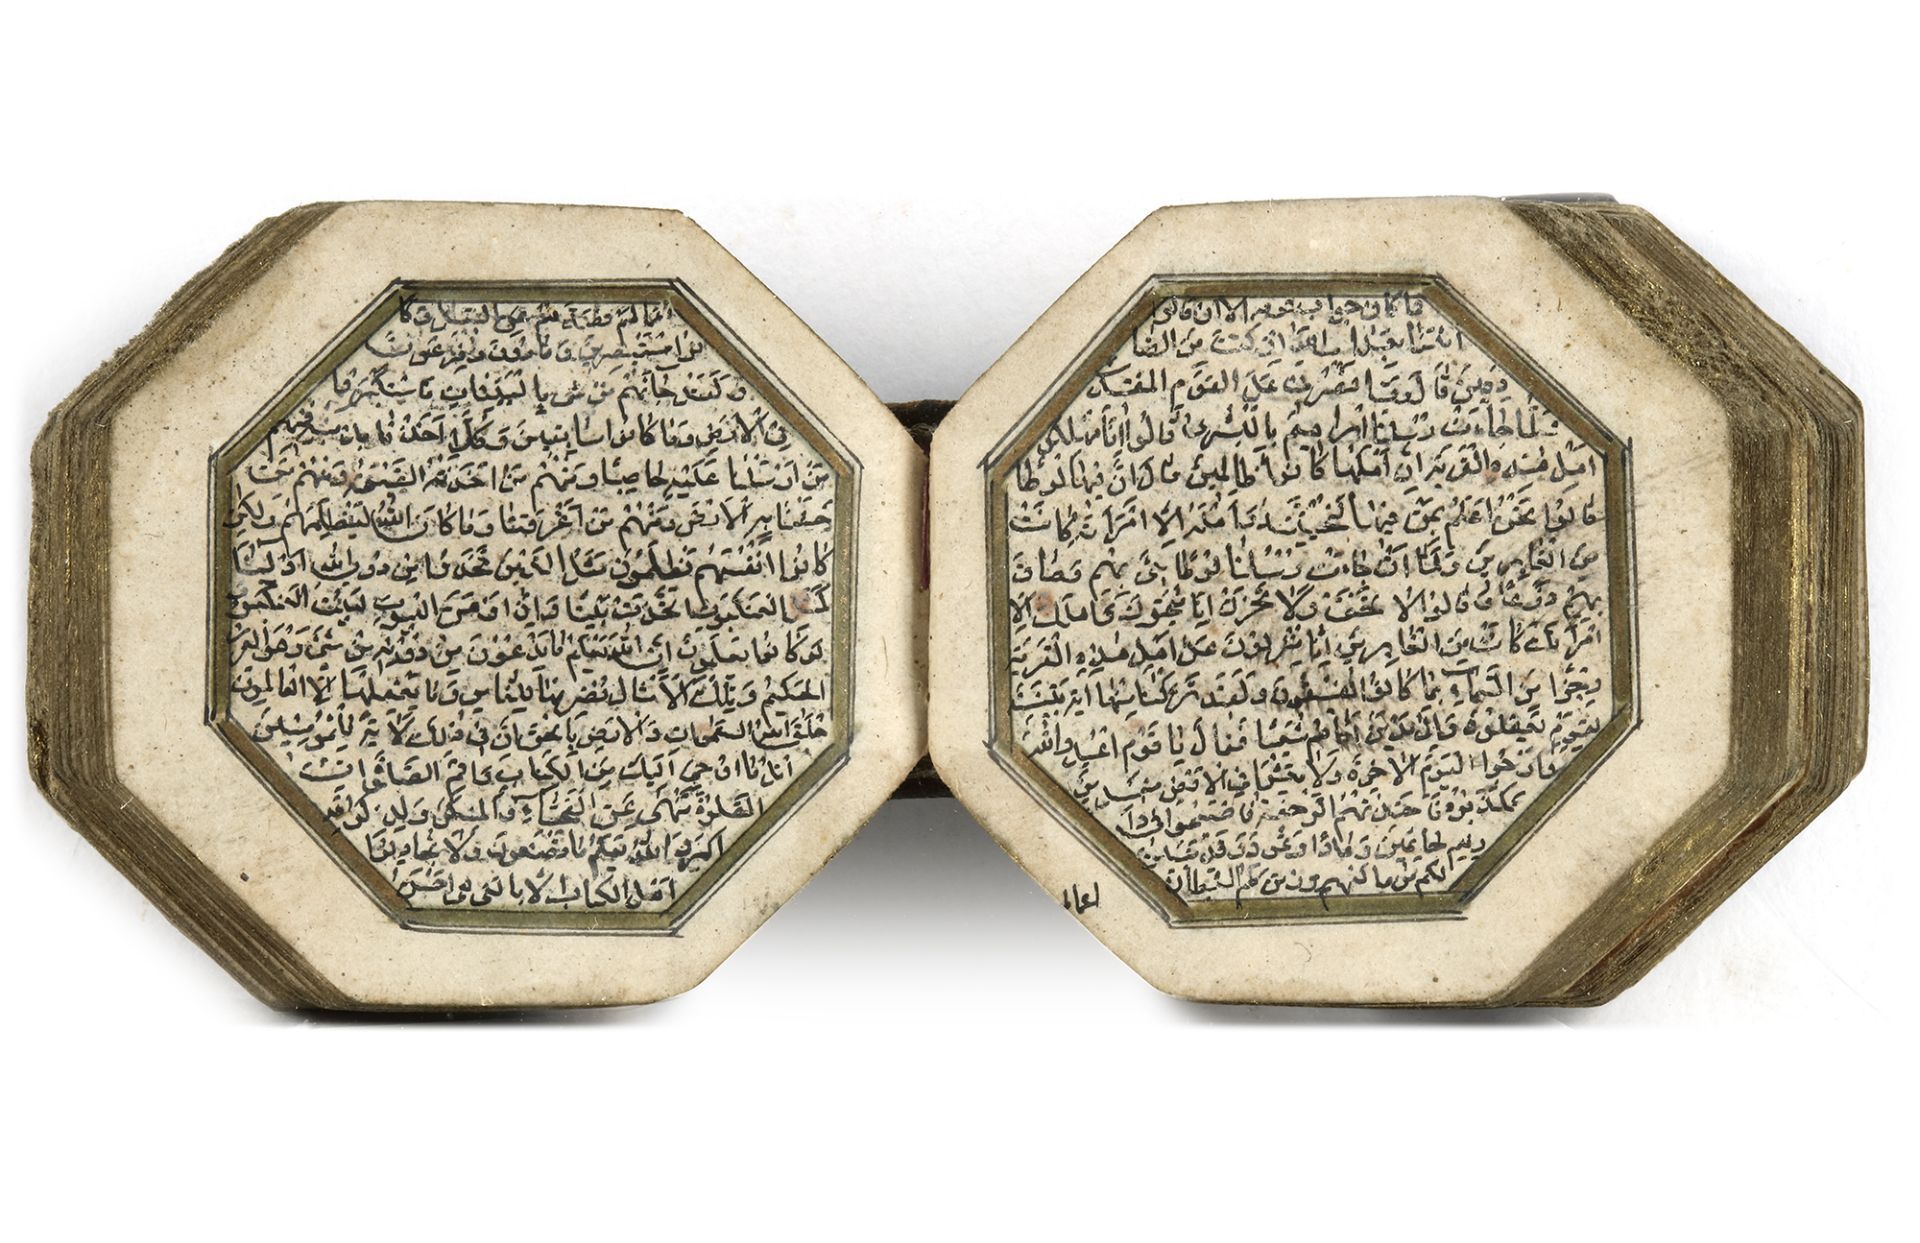 AN ILLUMINATED MINIATURE OCTAGONAL QURAN WITH THE LATER EMBOSSED NAME OF THE OWNER, AHMAD DHU'L KIFL - Image 2 of 7